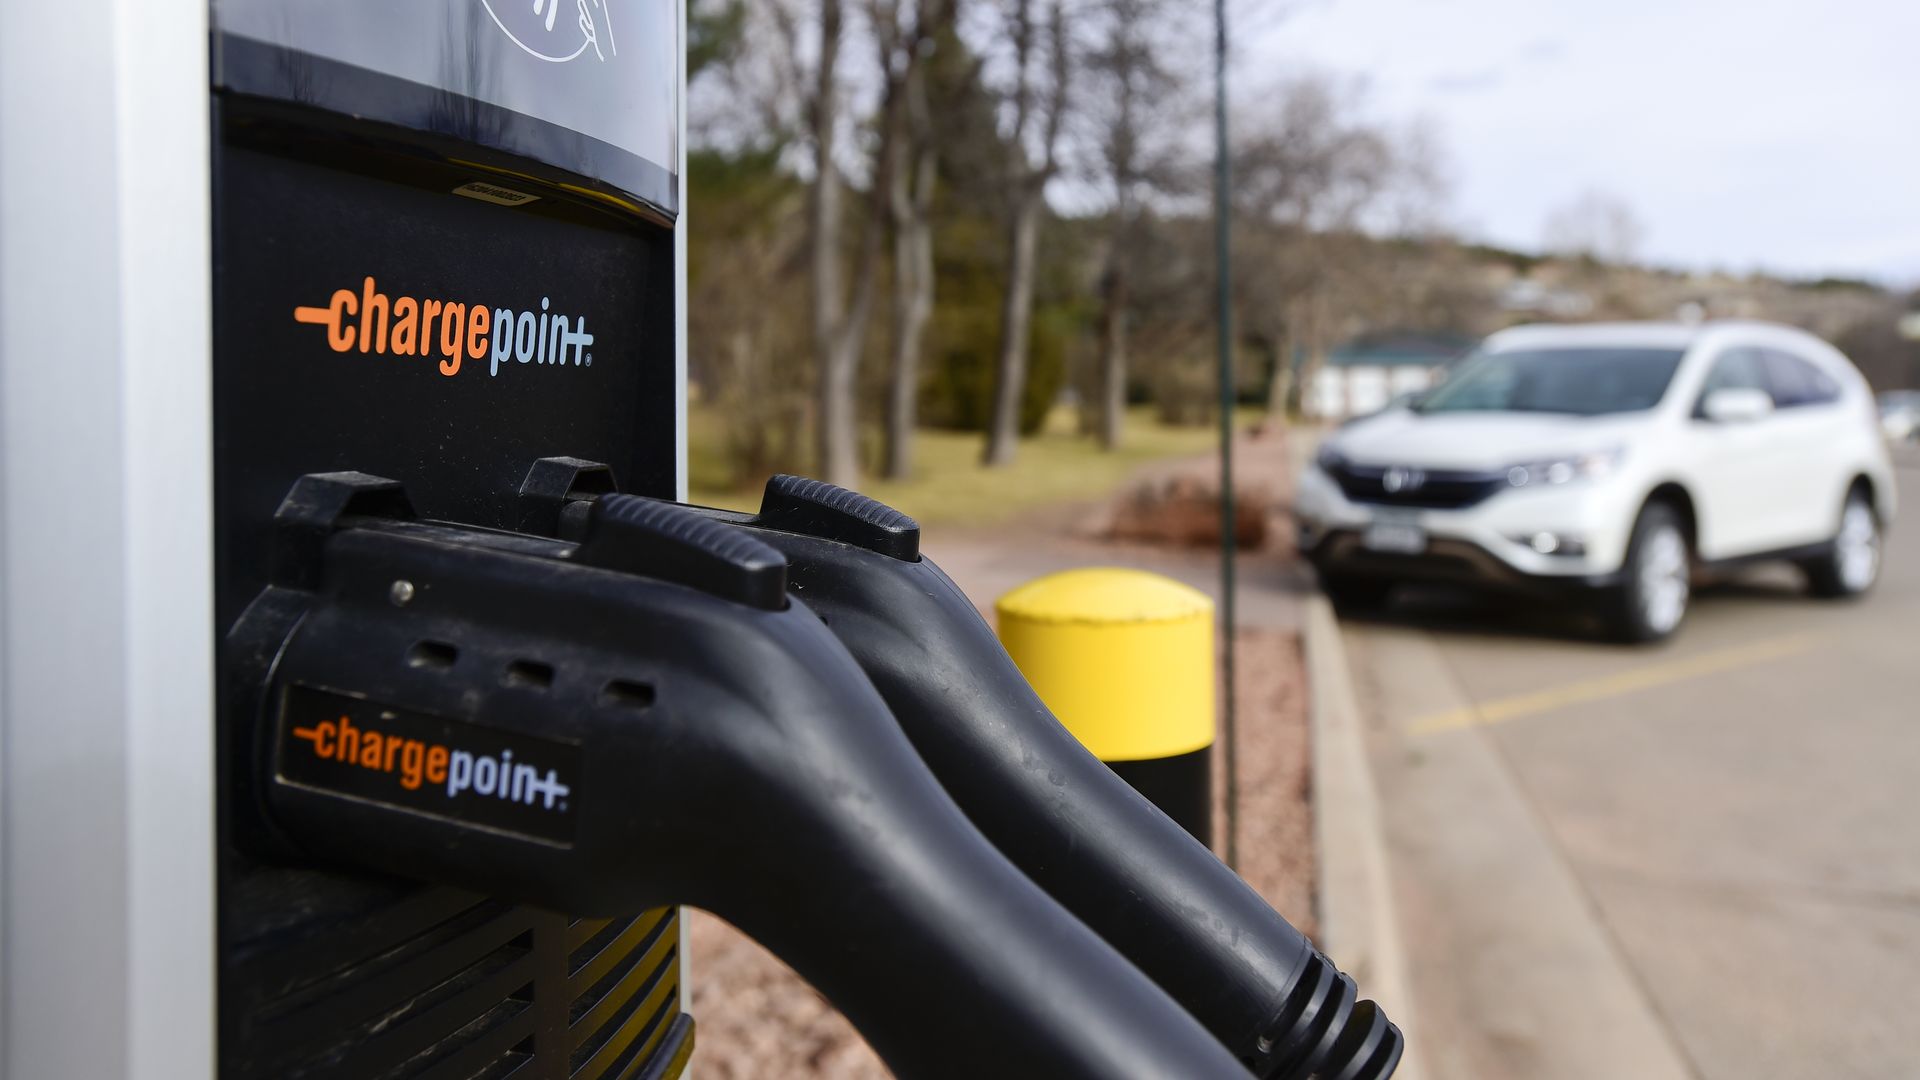 Image of Chargepoint charging station